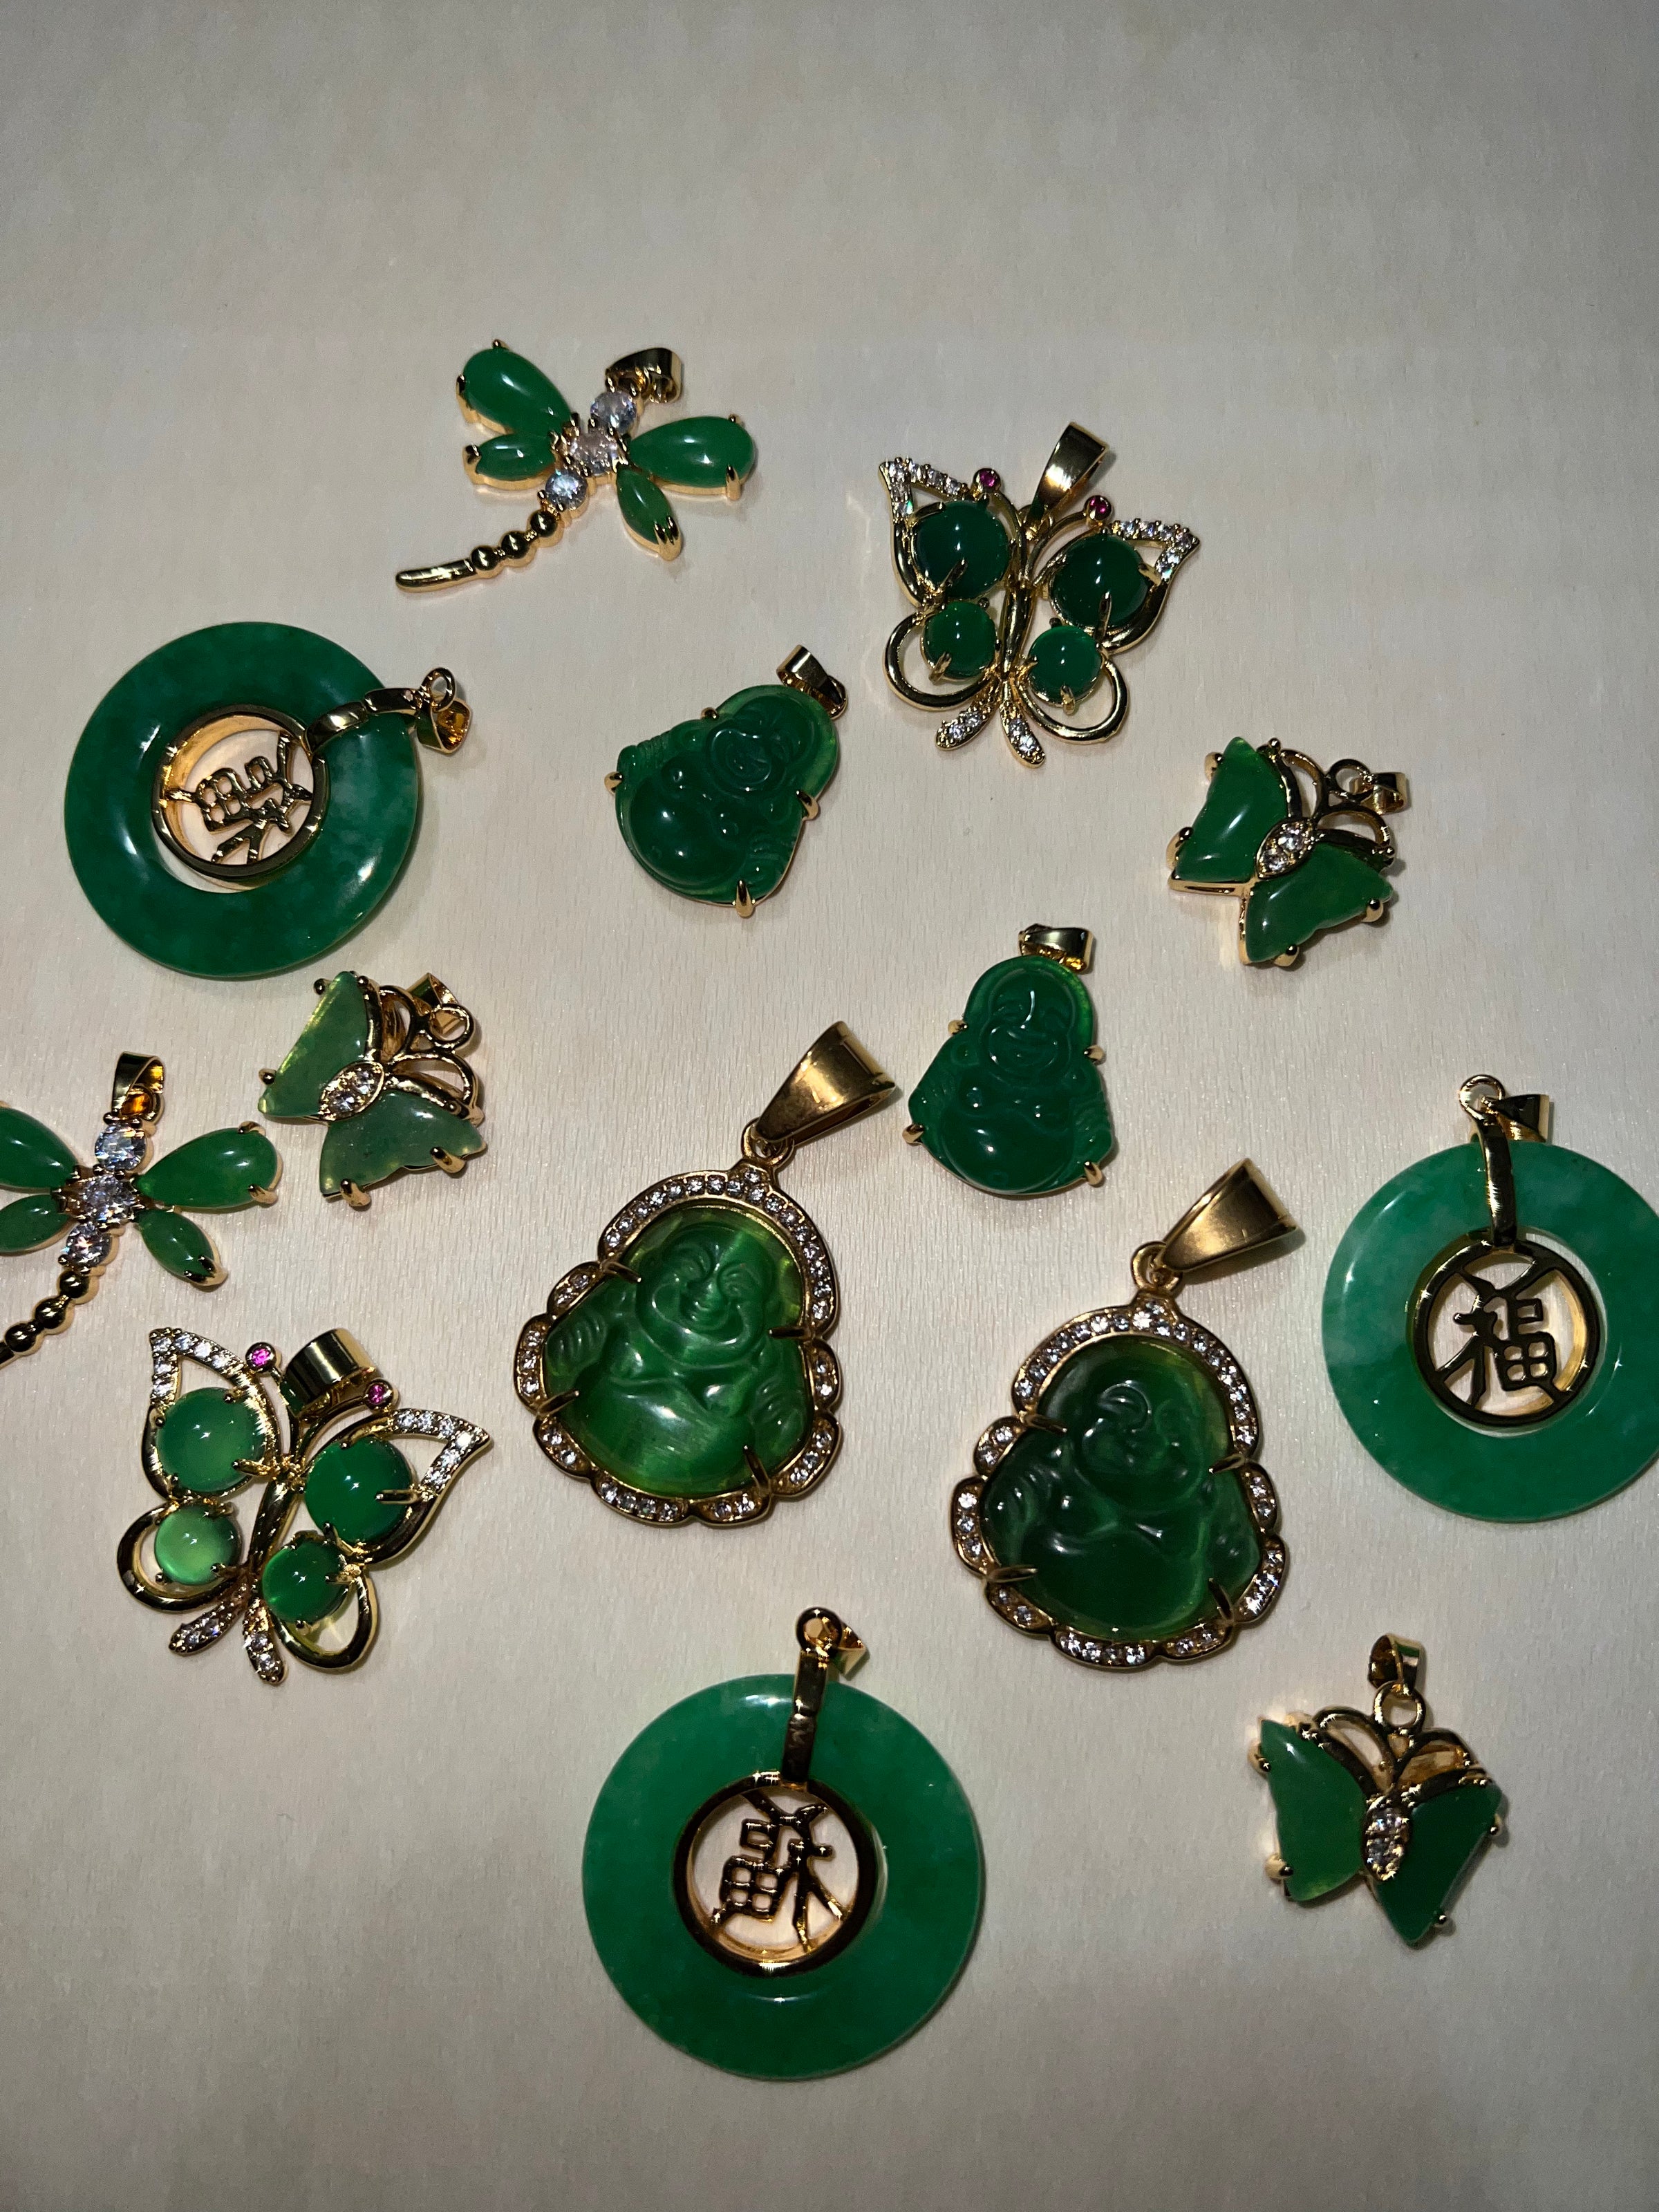 Jade Collection